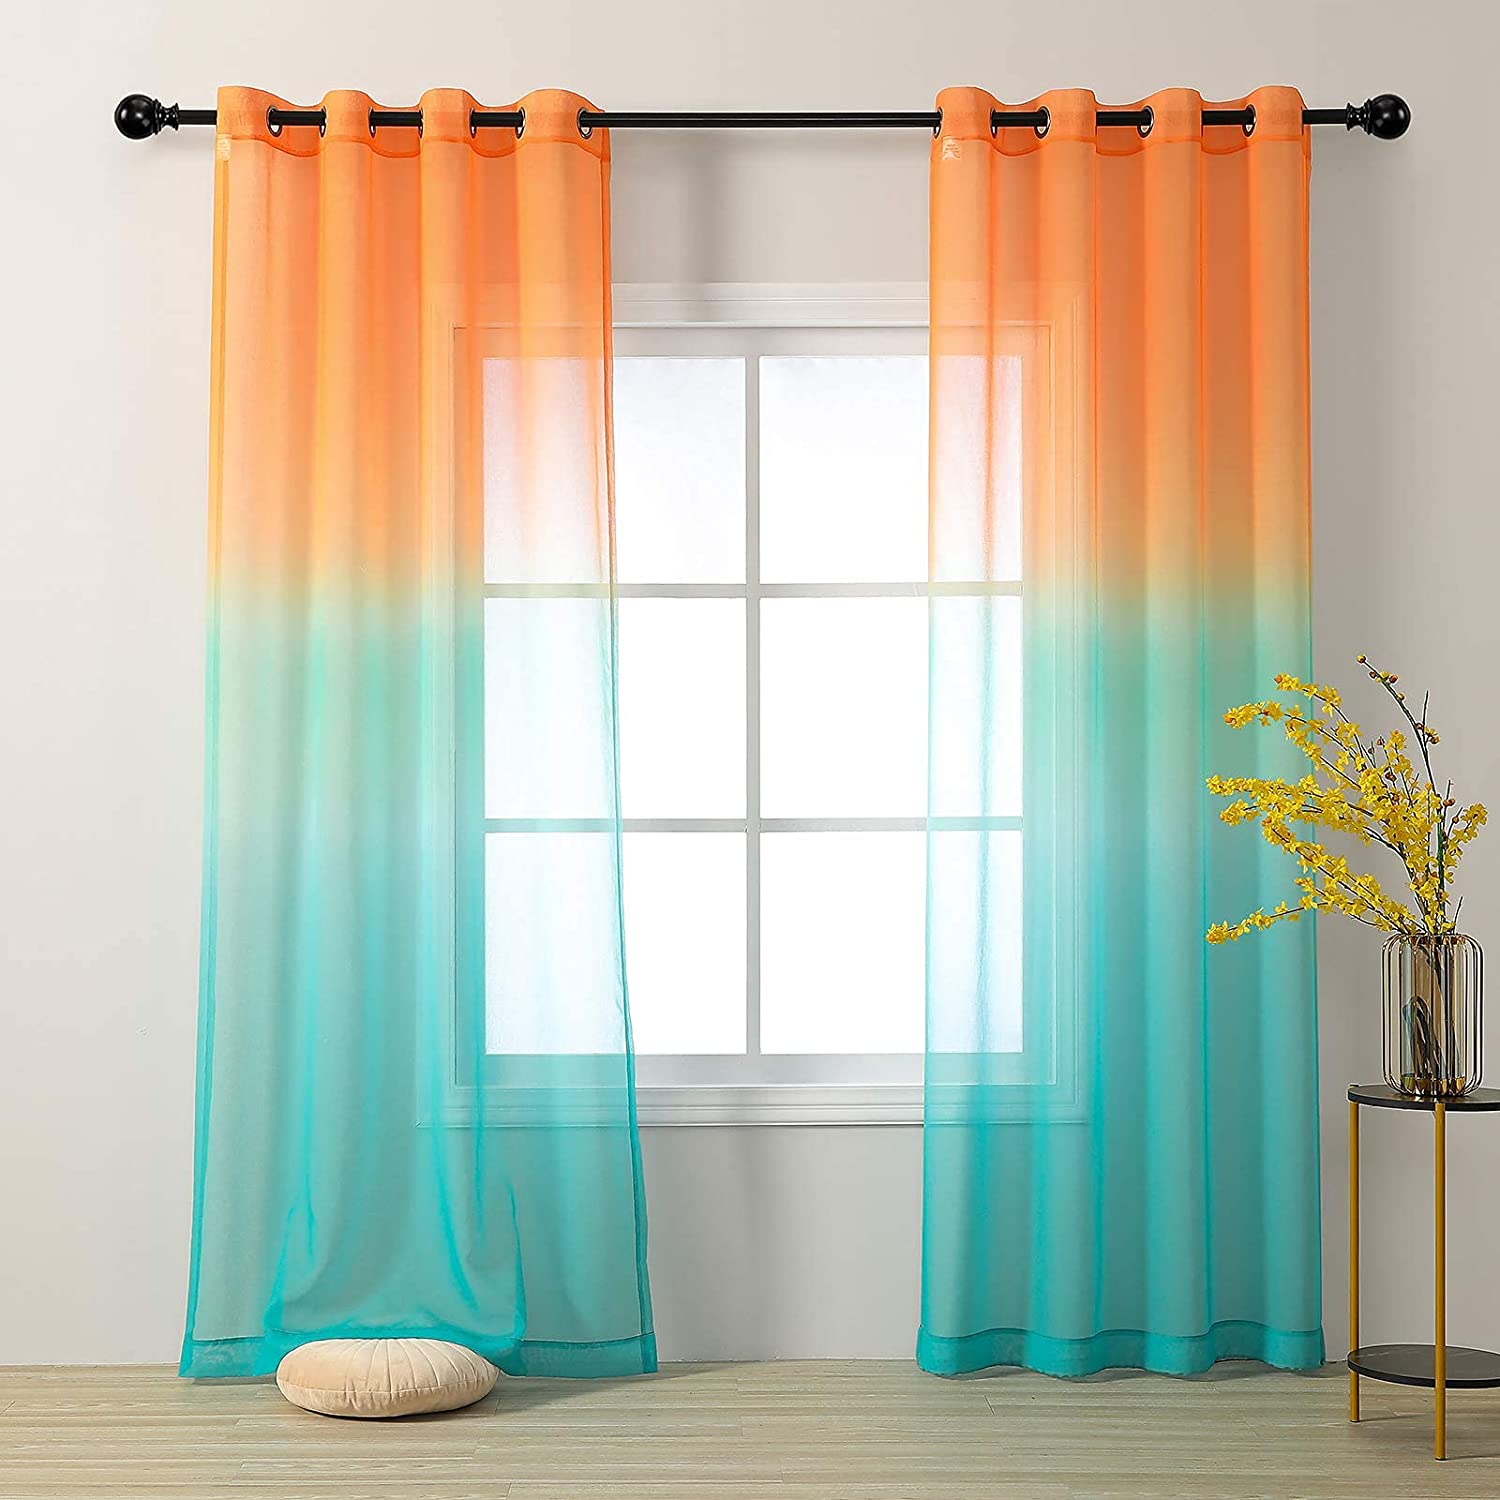 Curtains with Color Gradations